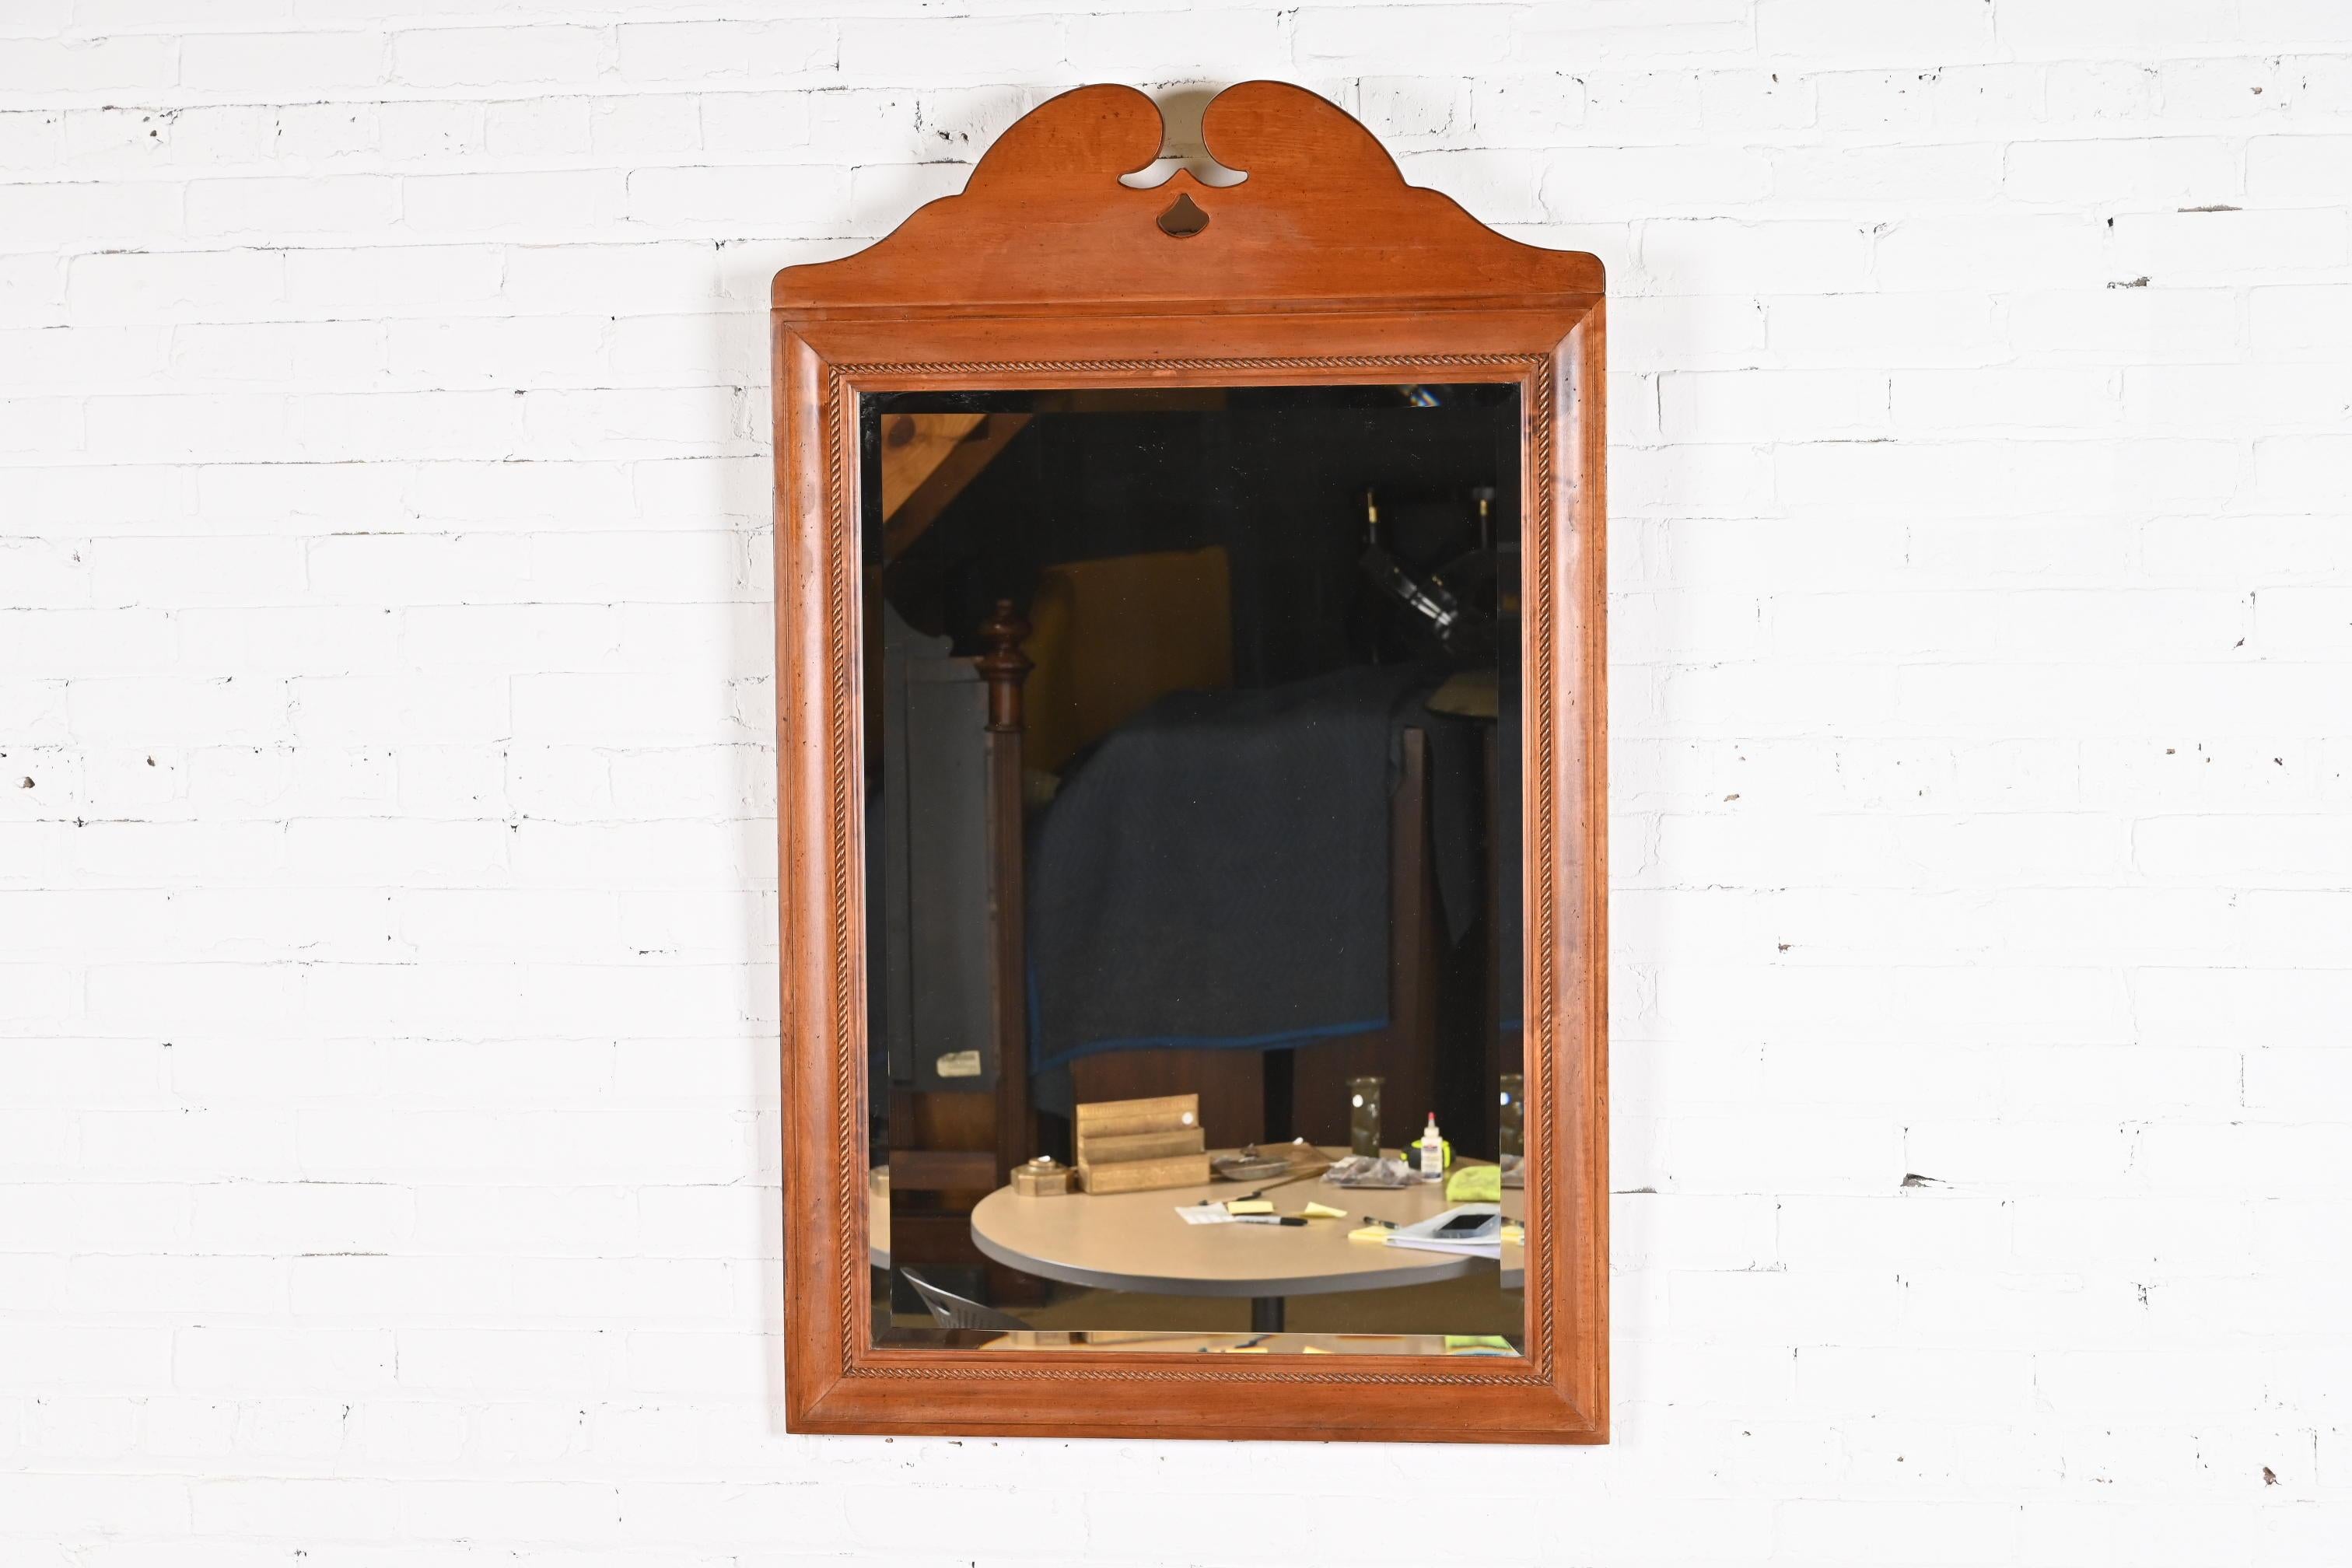 A stylish Early American or American Colonial style maple framed beveled wall mirror

USA, Late 20th Century

Measures: 30